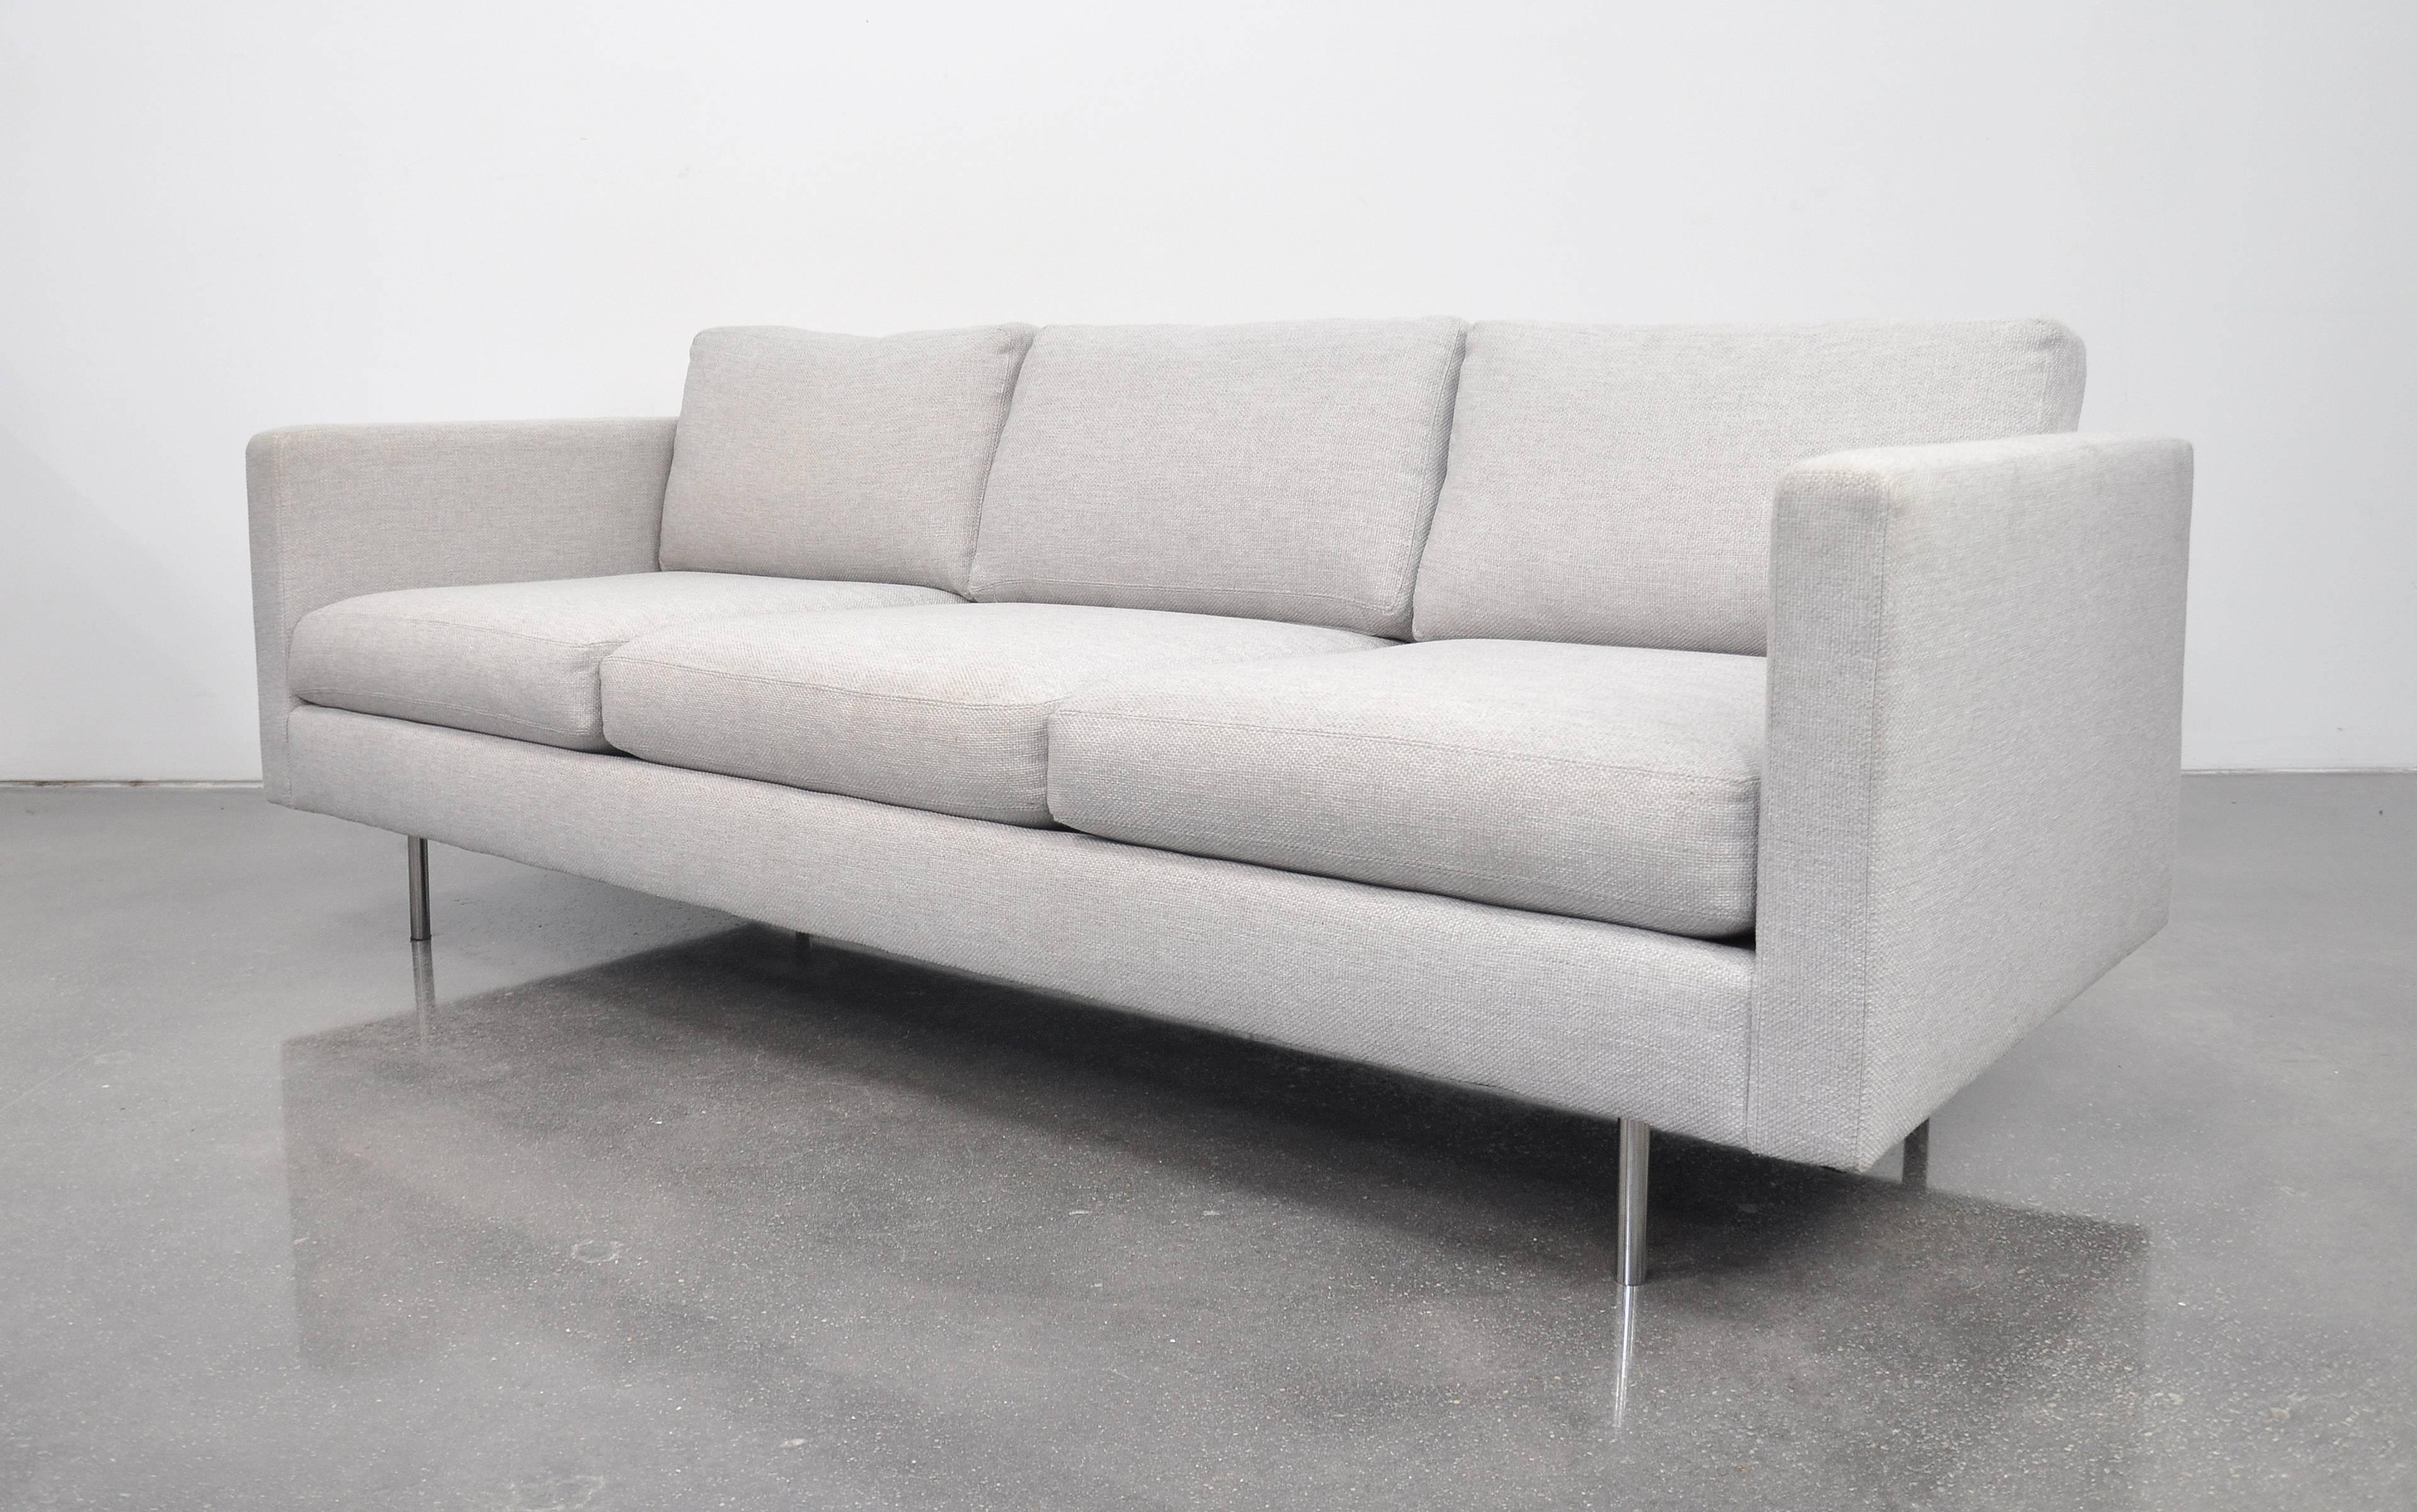 A vintage model 855-303 light grey couch with polished stainless steel tubular legs. Very comfortable, neutral and Classic, it works well with virtually any decor, from contemporary to traditional to Danish, French, Italian, Scandinavian or American